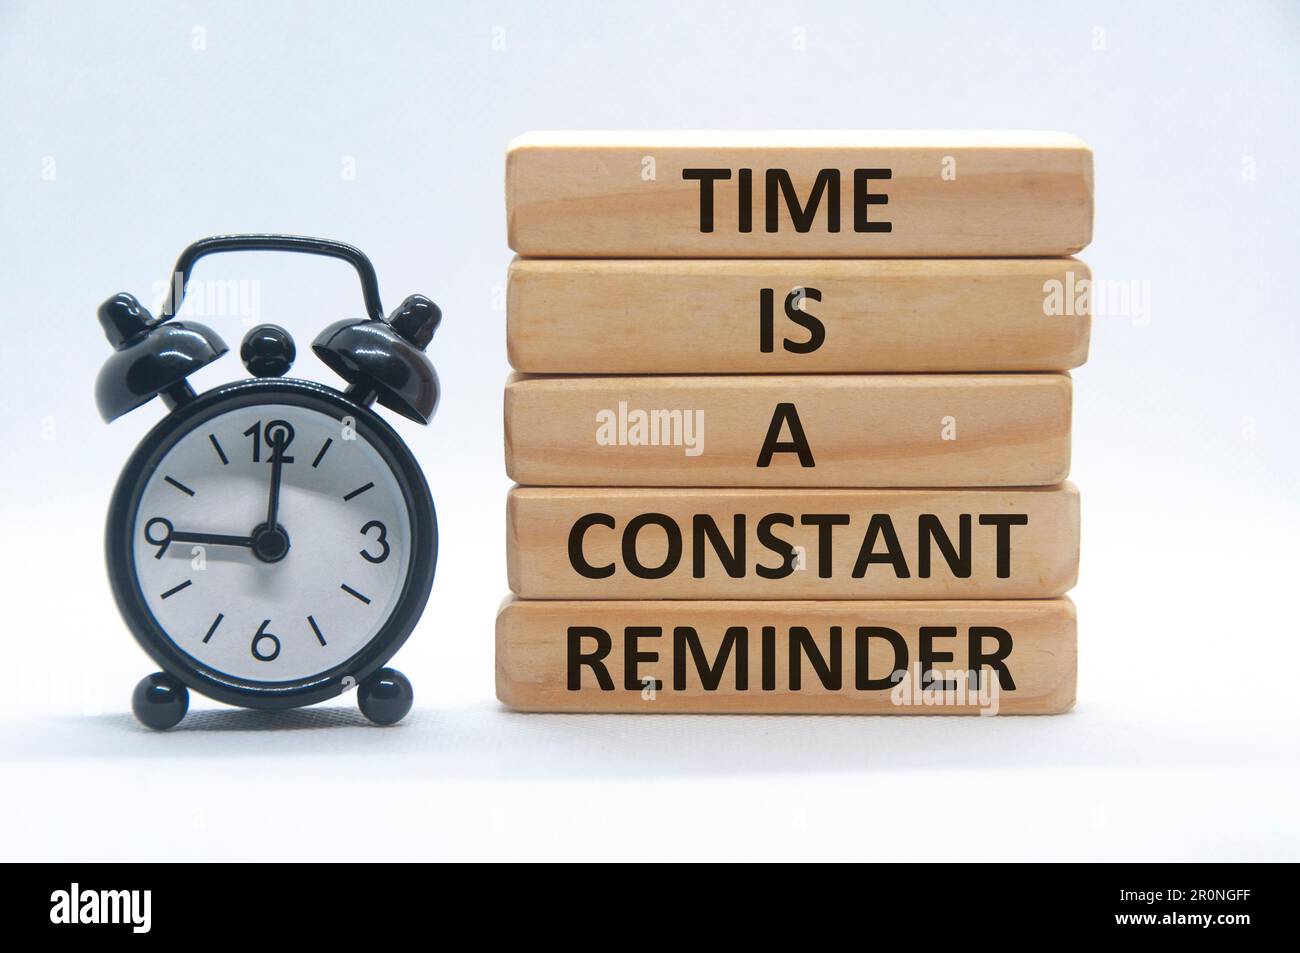 Time is a constant reminder text on wooden blocks with alarm clock on white background. Stock Photo